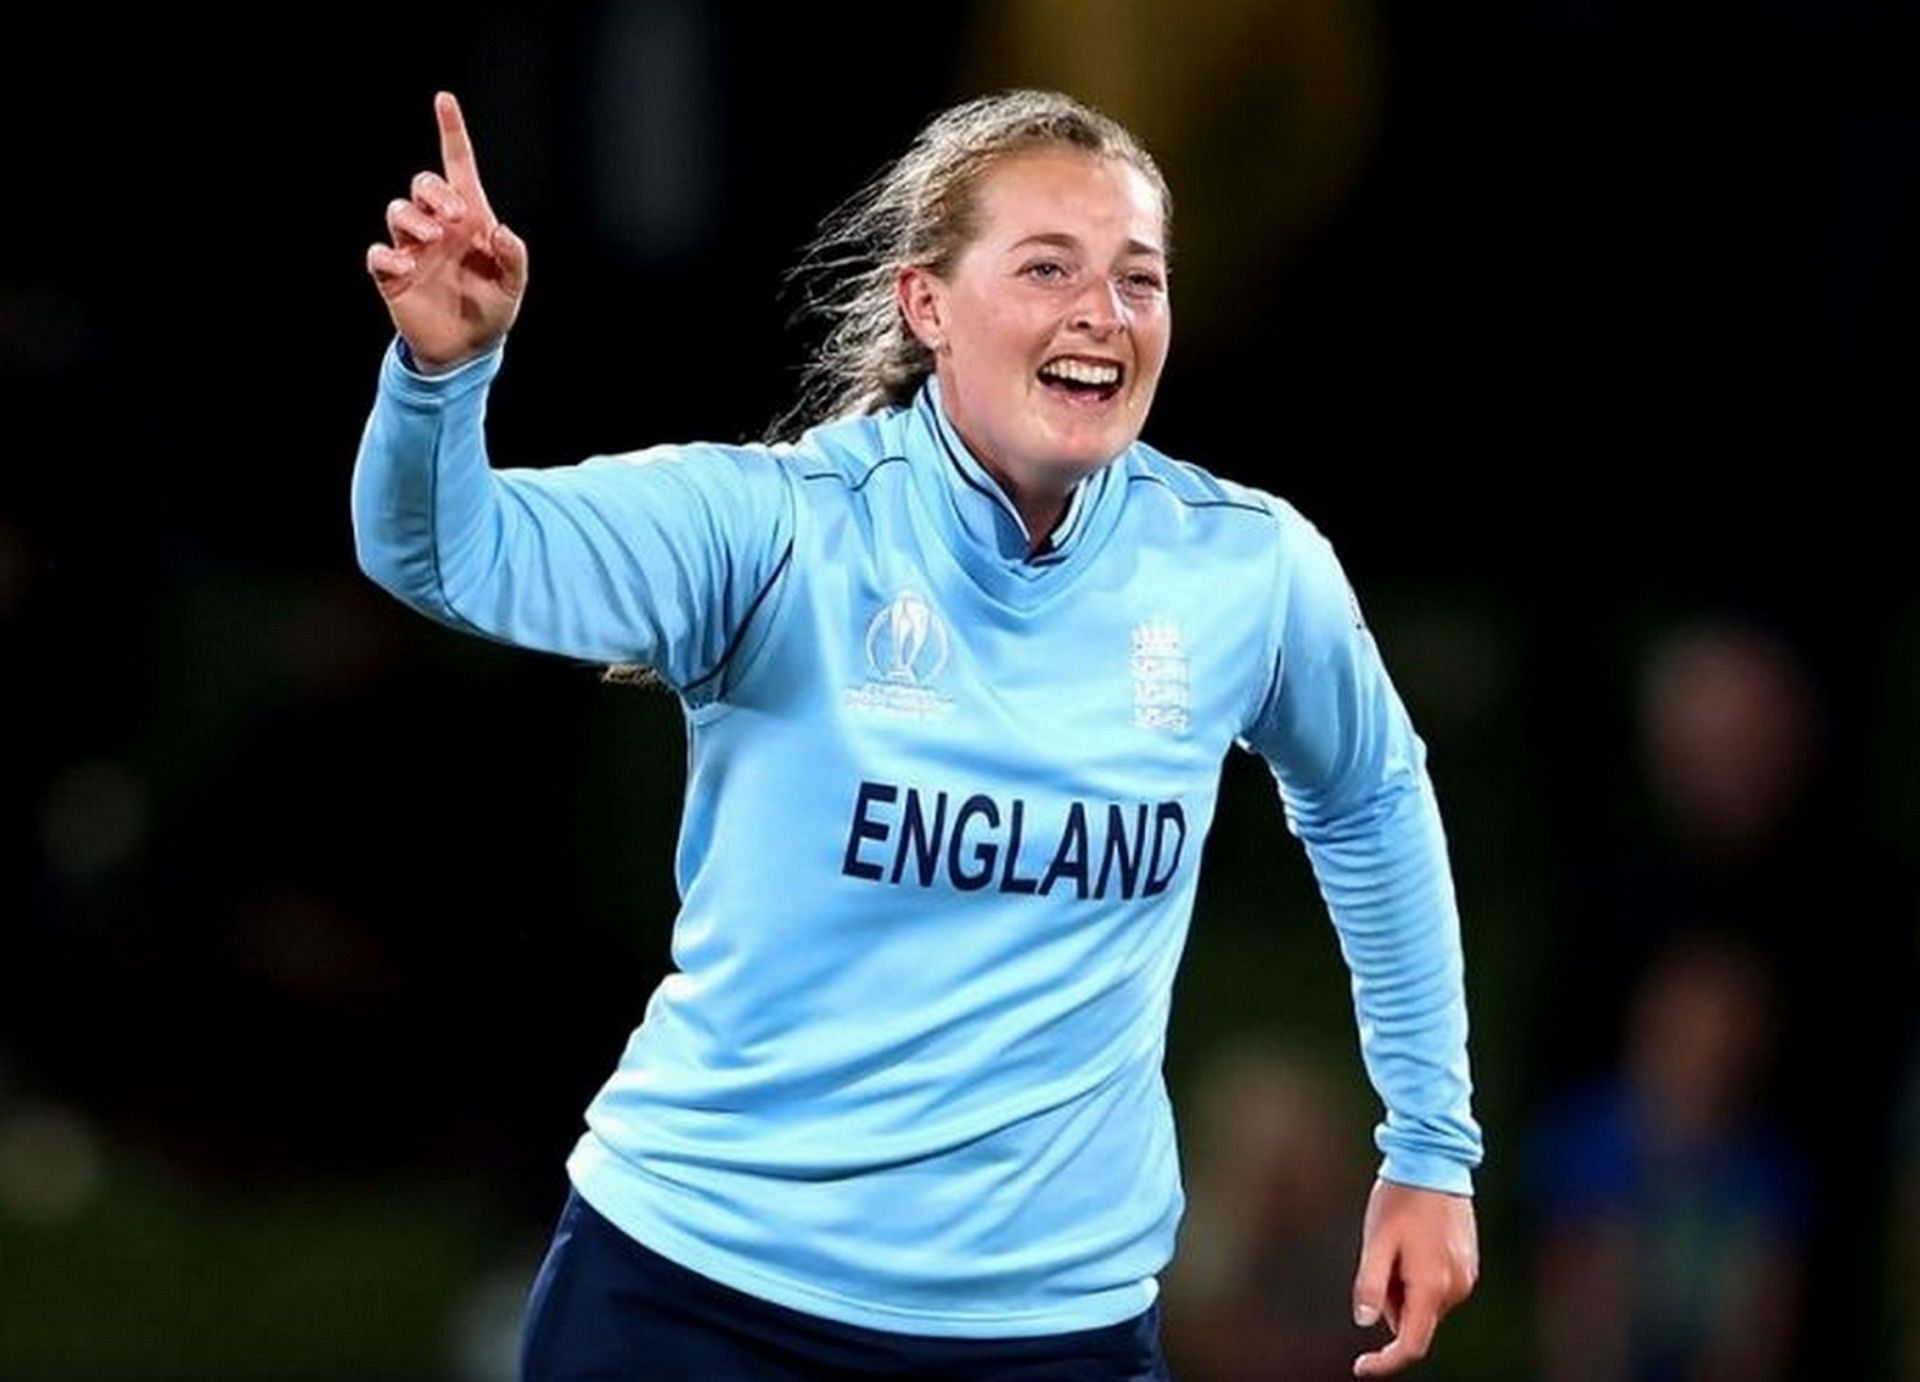 Sophie Ecclestone has proved to be a potent match-winner for England in her brief international career so far. Image: ICC